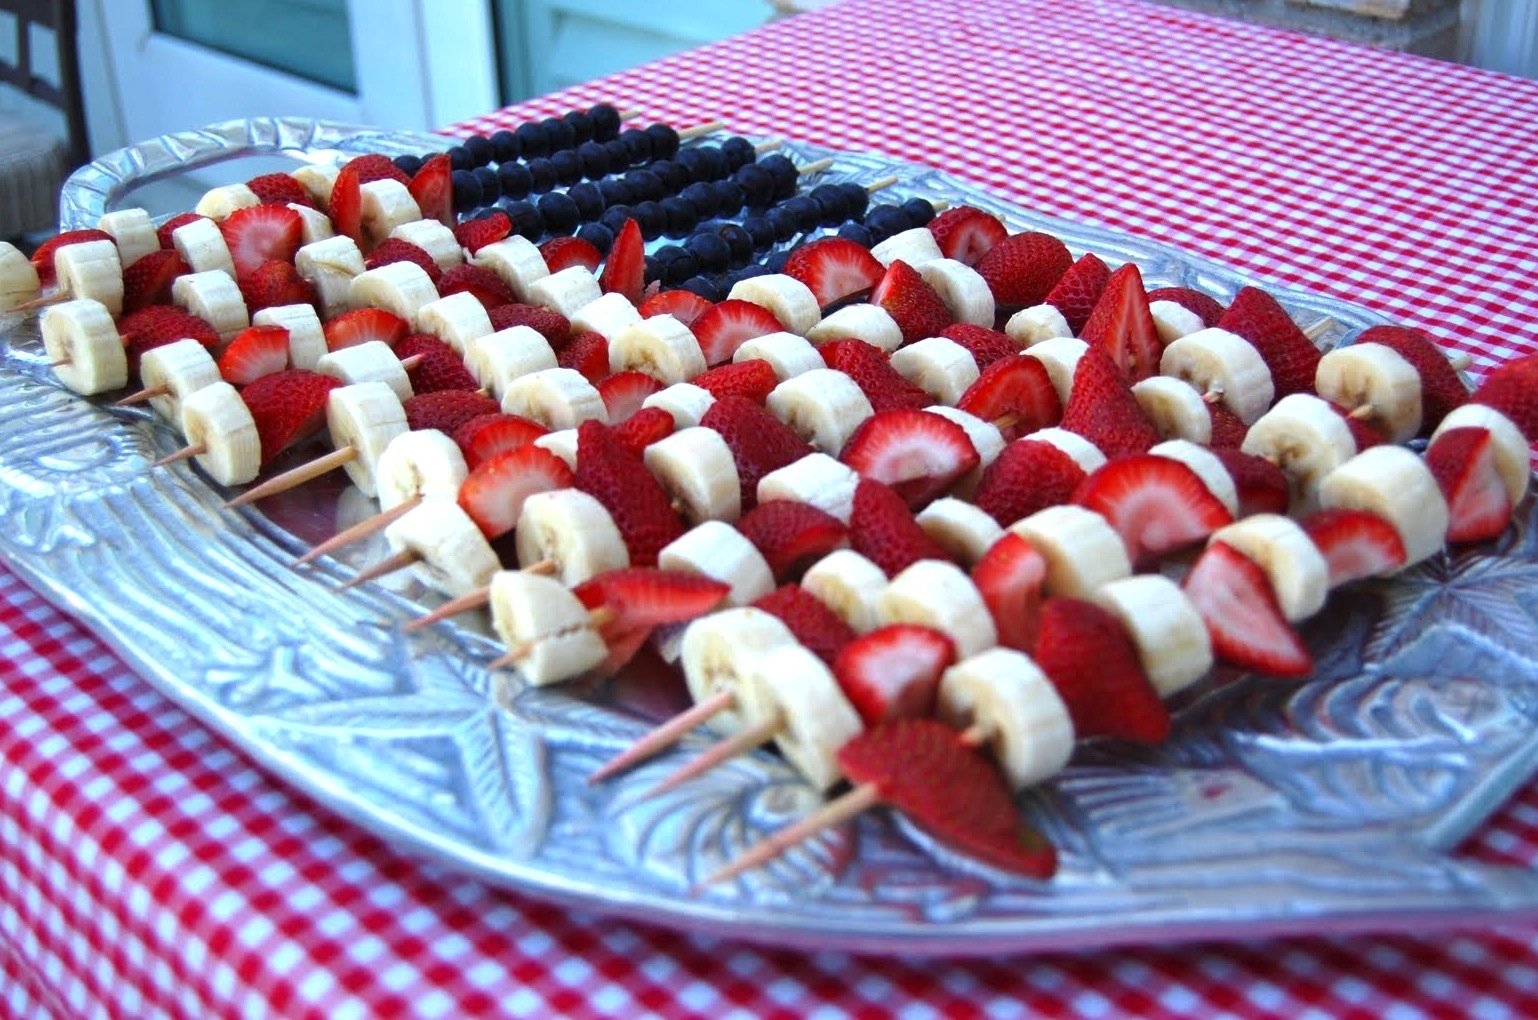 10 Great Fourth Of July Bbq Ideas awesome food for your july 4th bbq lds s m i l e 1 2022